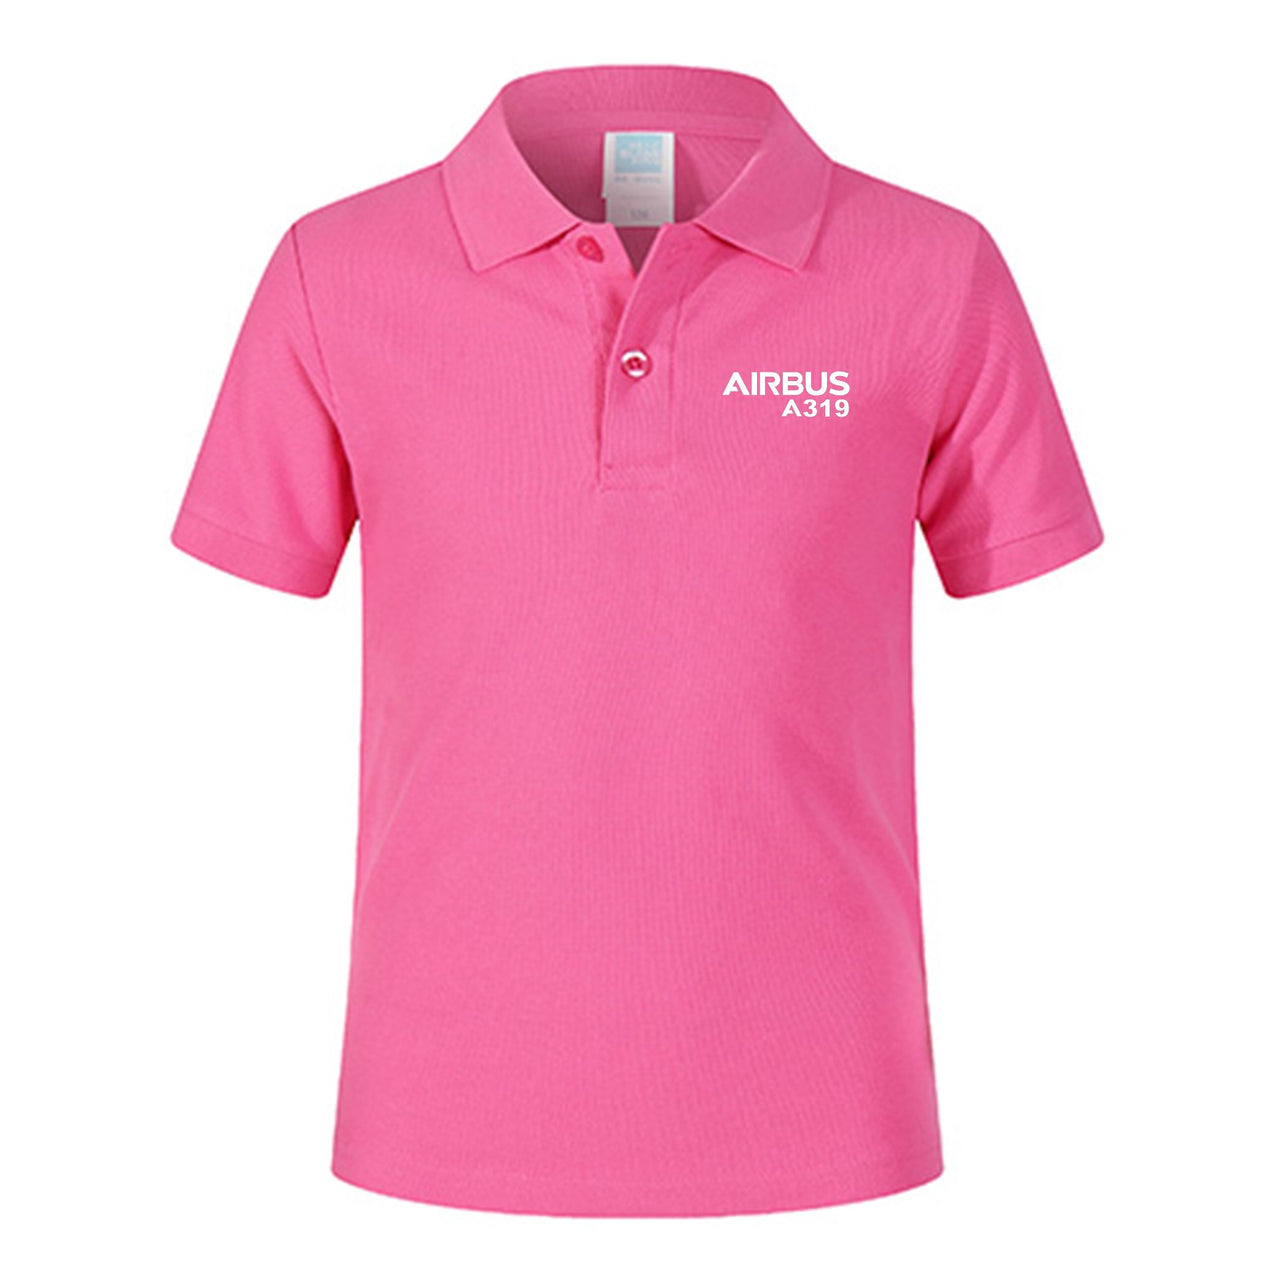 Airbus A319 & Text Designed Children Polo T-Shirts